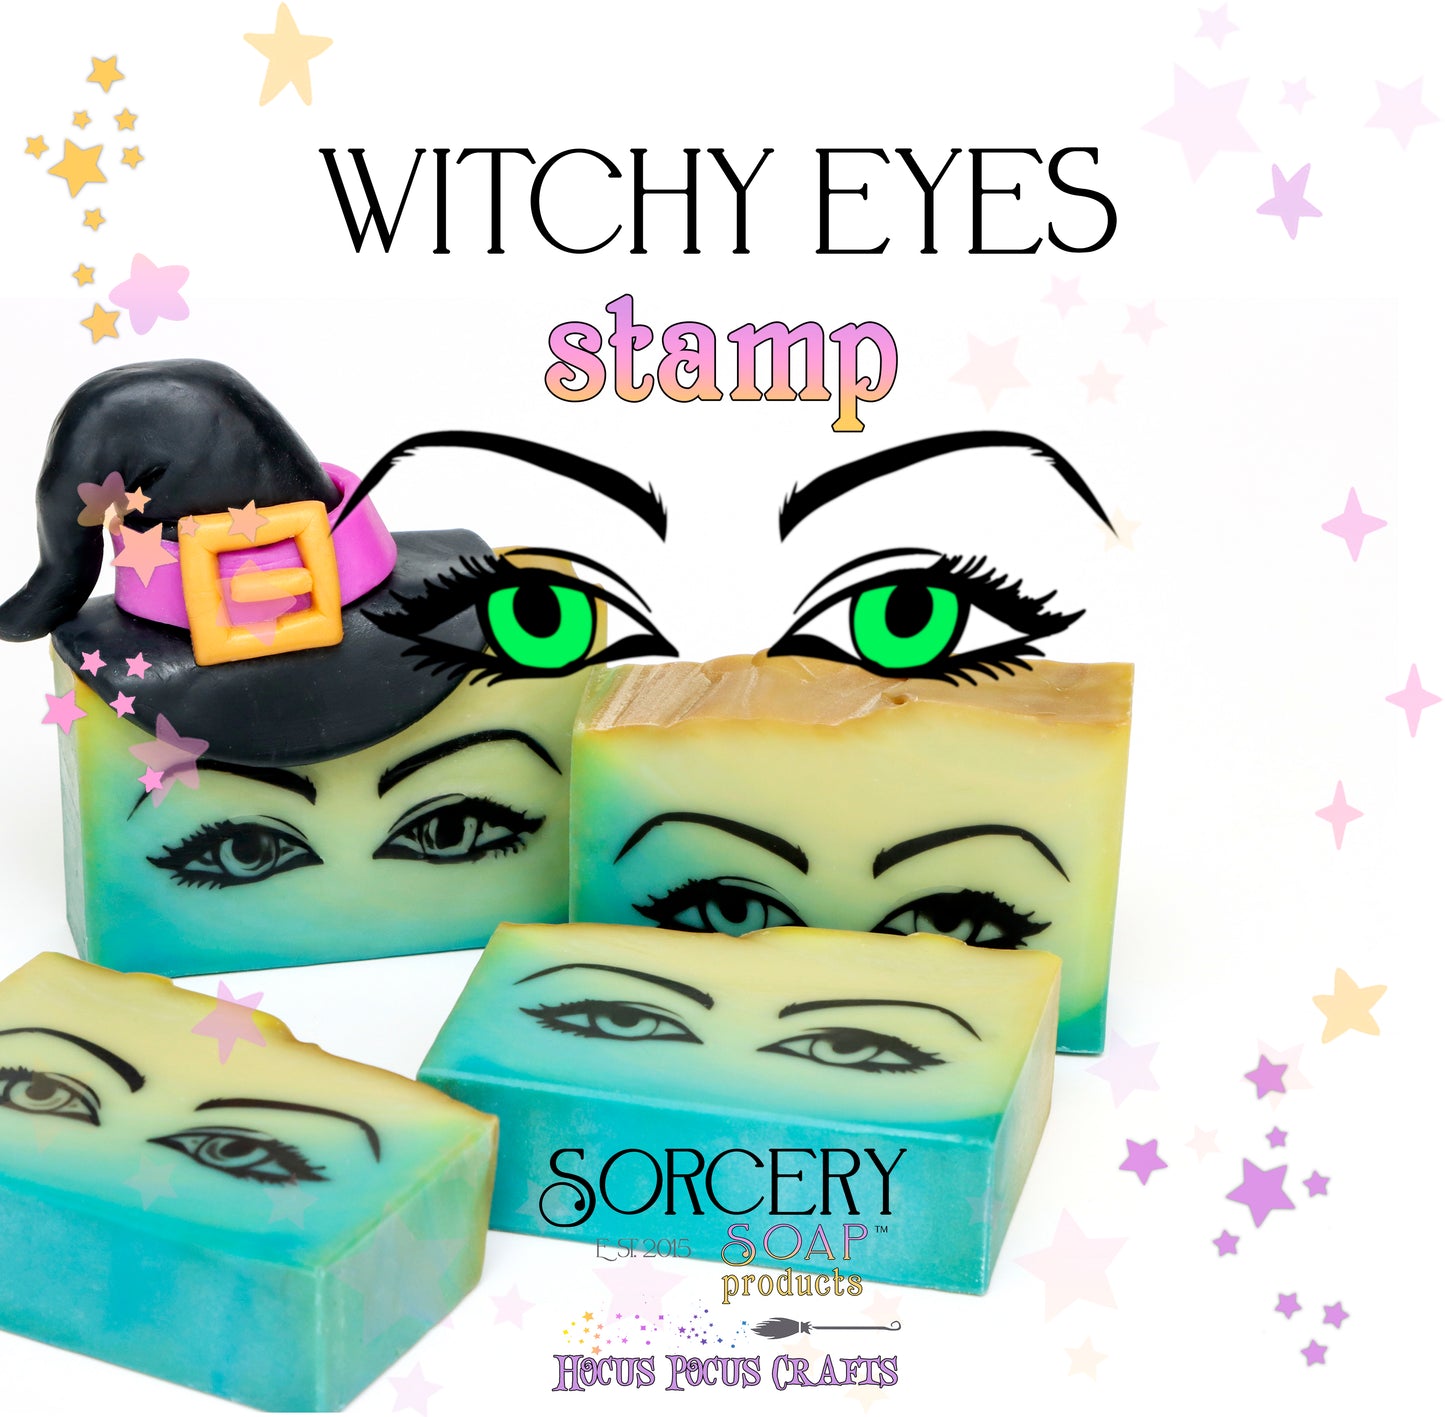 Witchy Eyes Stamp